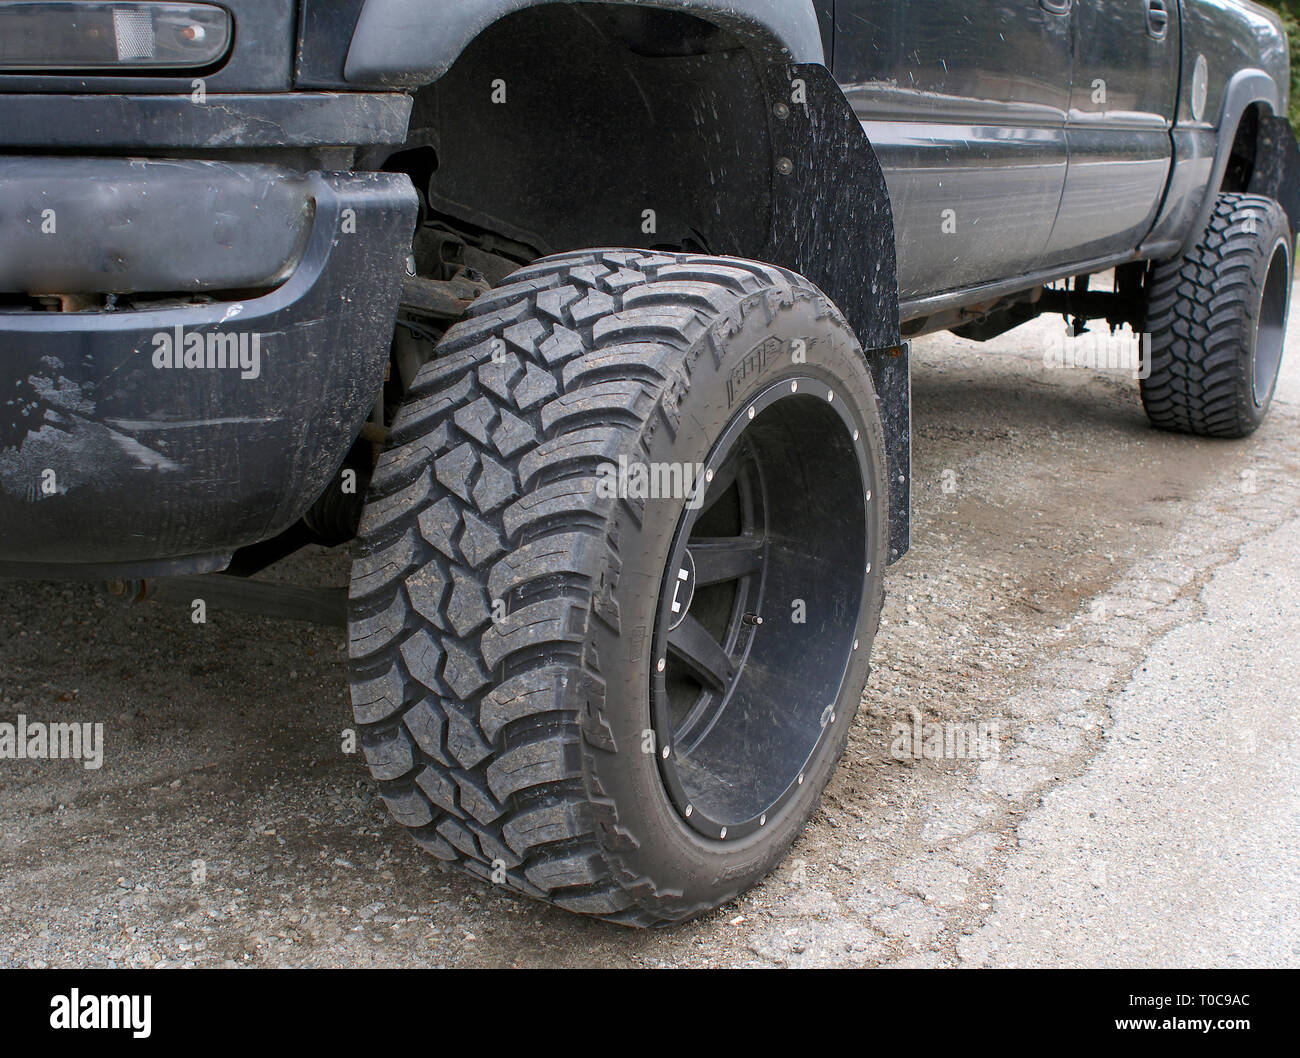 Low angle of black four wheel drive pickup truck showing the rugged front tire tread and wheel. Stock Photo